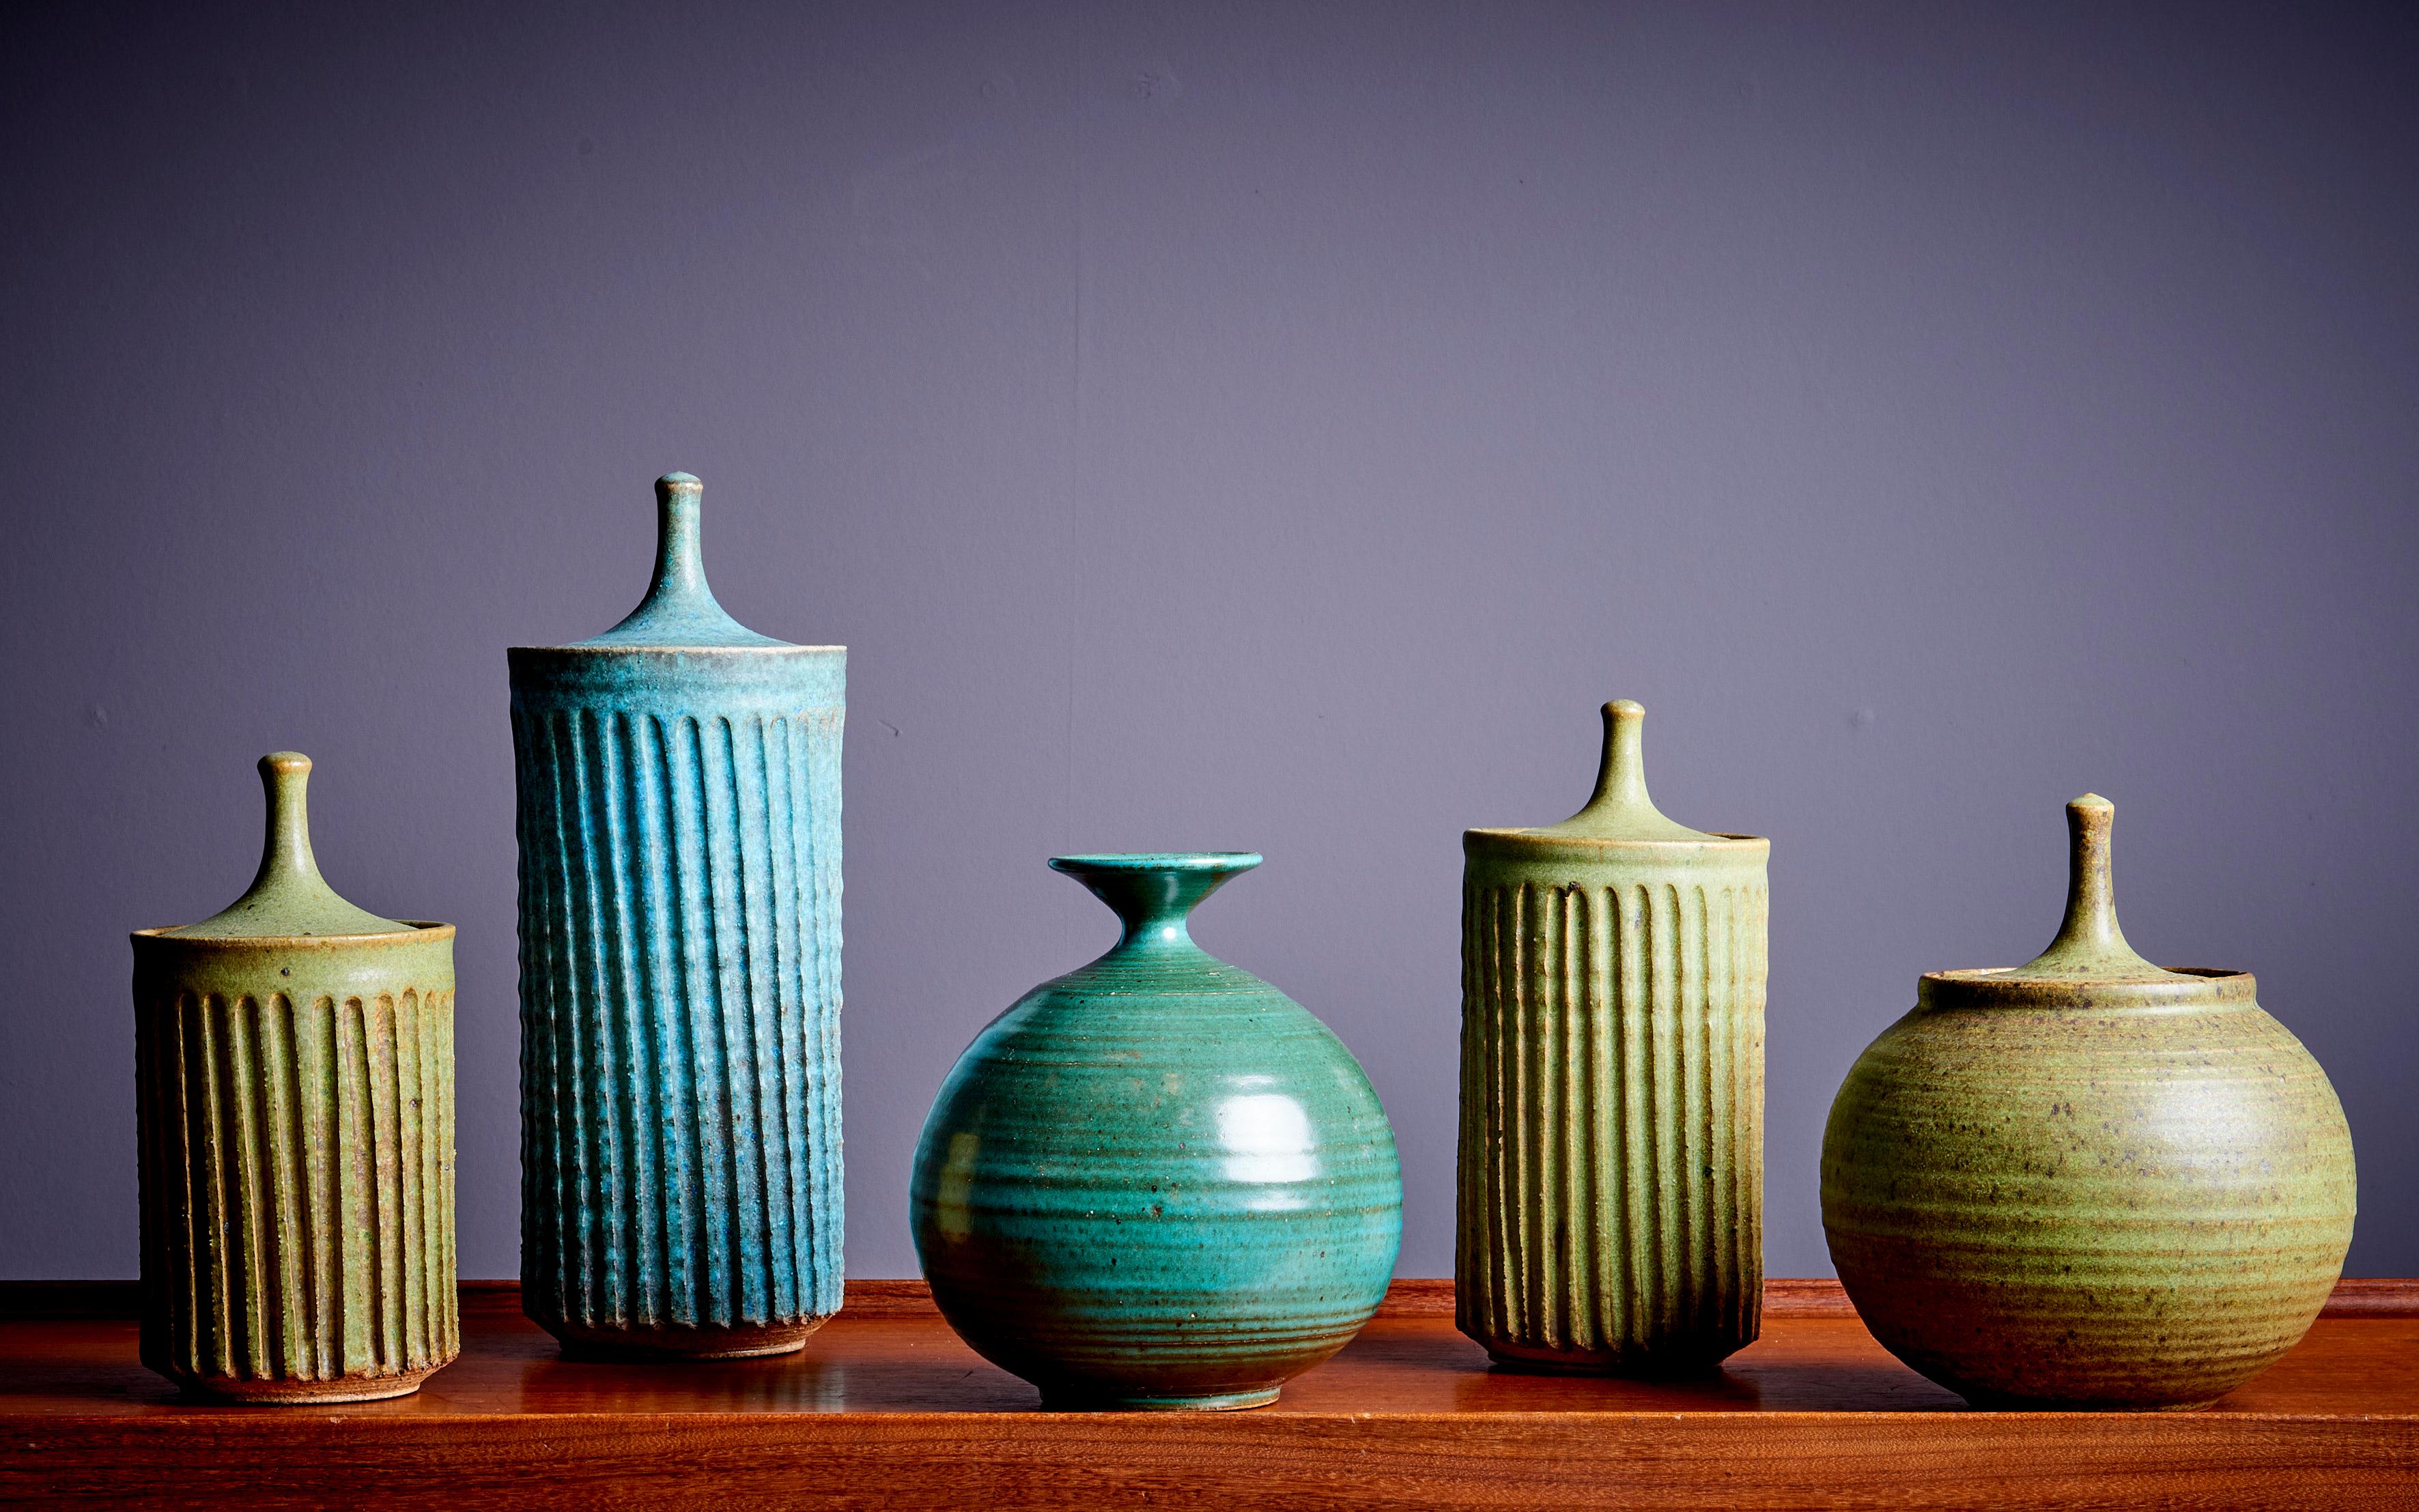 Tom McMillin Ceramic Vessels with lid and Vase in green, USA 1960s. The measurements given apply to the tallest vessel. 